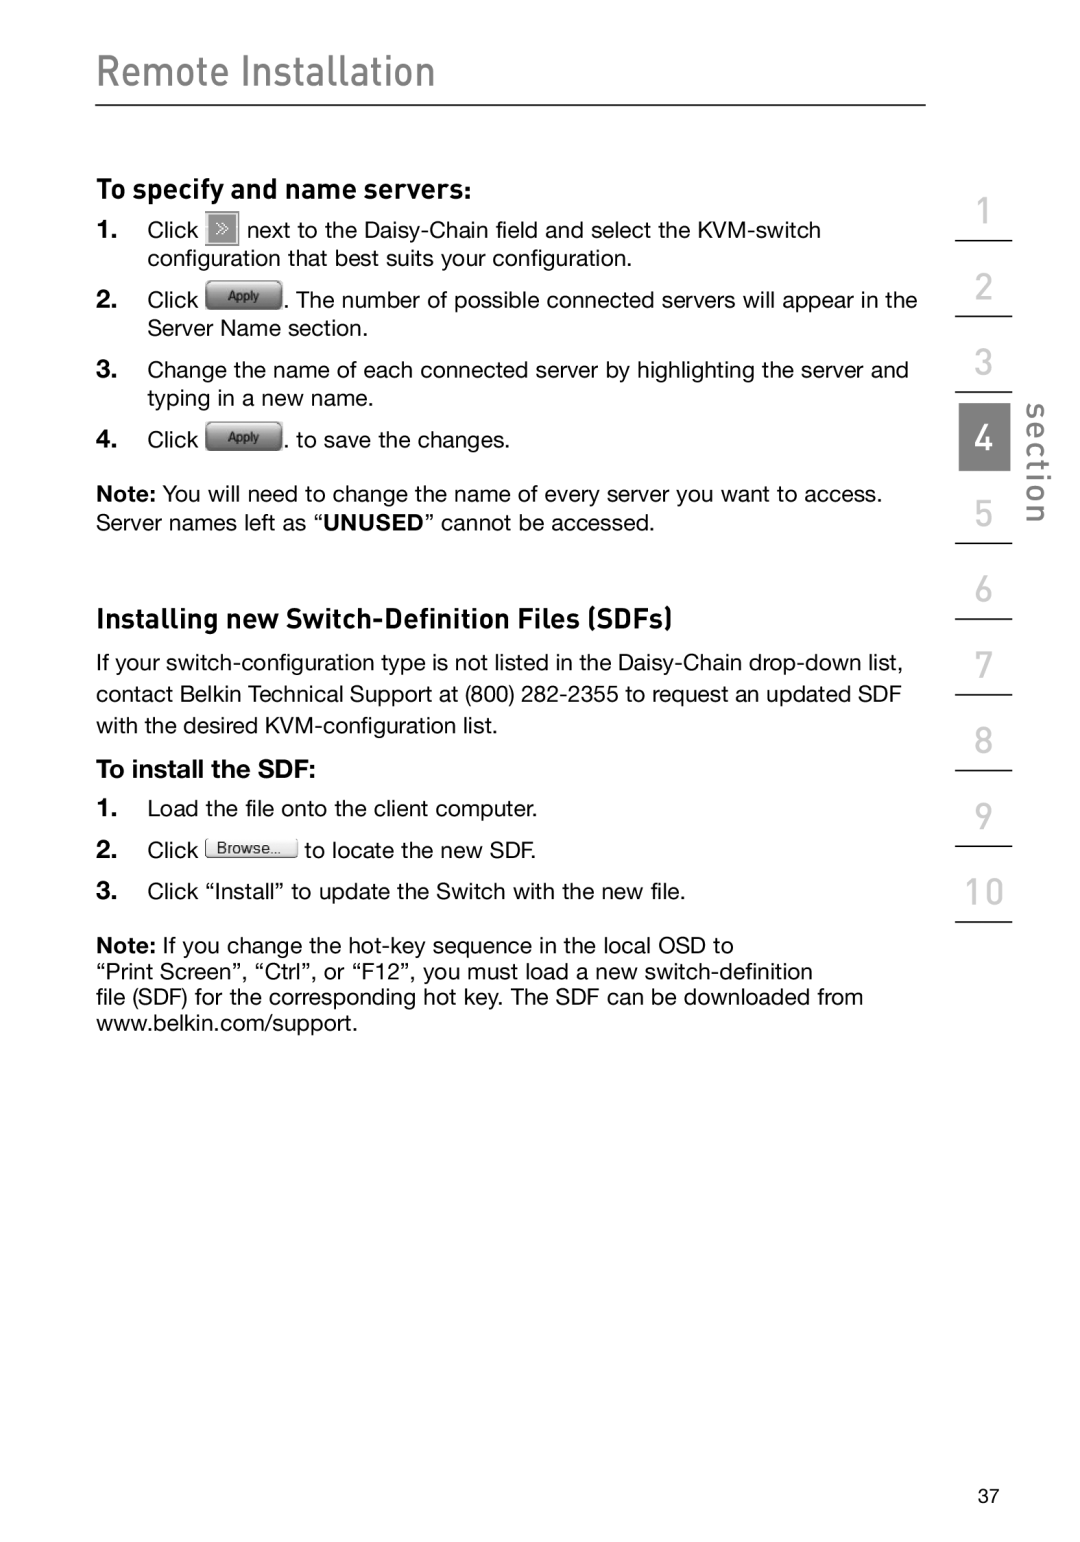 Belkin F1DP108G To specify and name servers, Installing new Switch-Definition Files SDFs, Remote Installation, section 